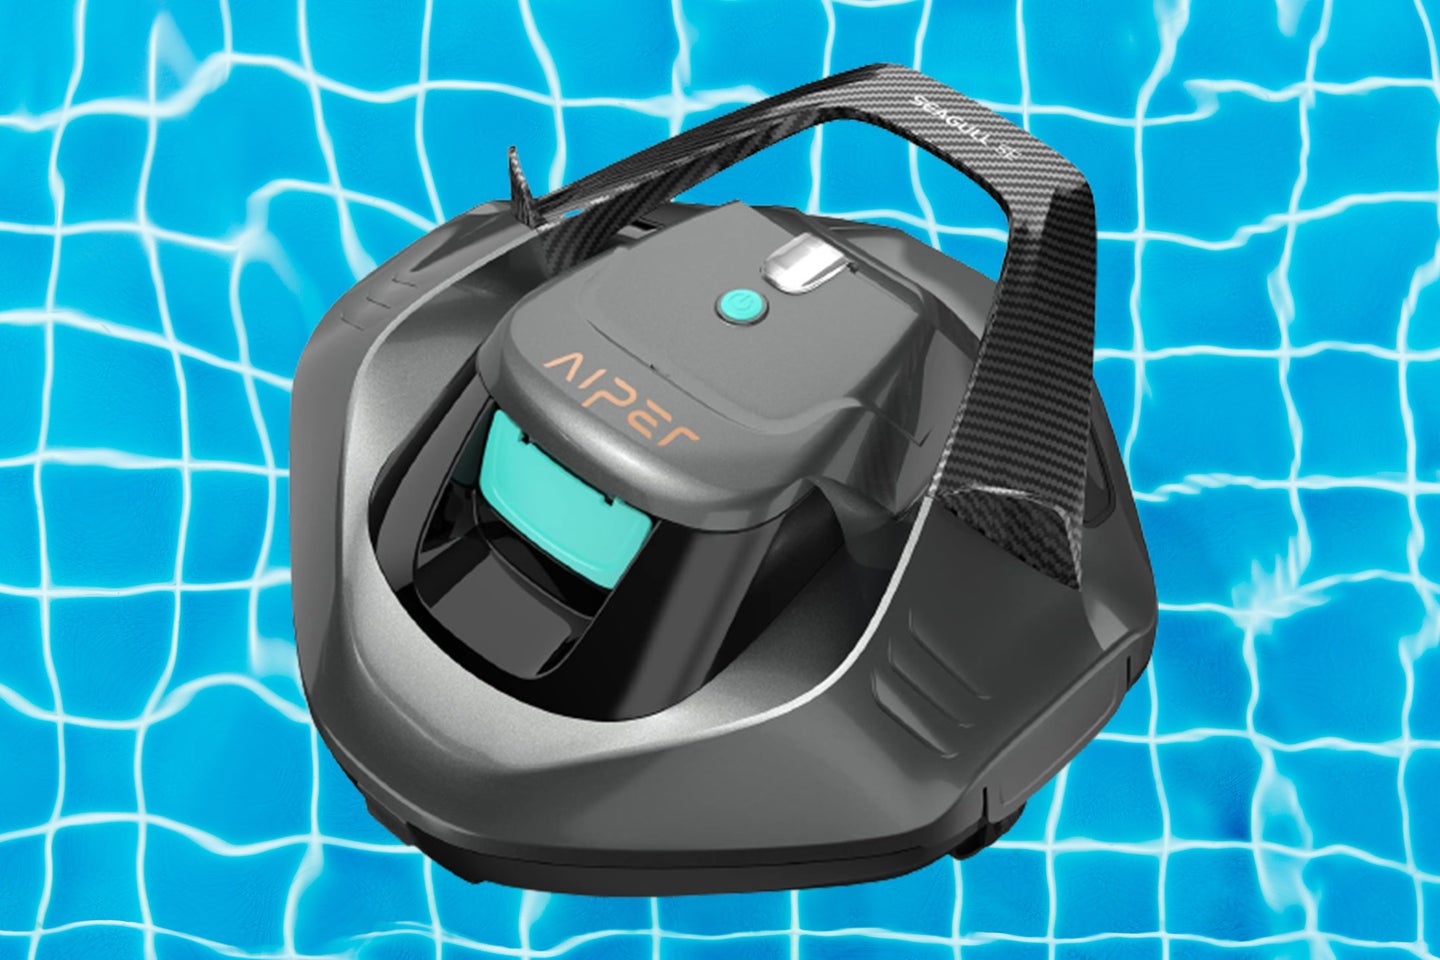 An AIPER Seagull SE cordless robotic pool vacuum on top of a background that looks like the bottom of a pool